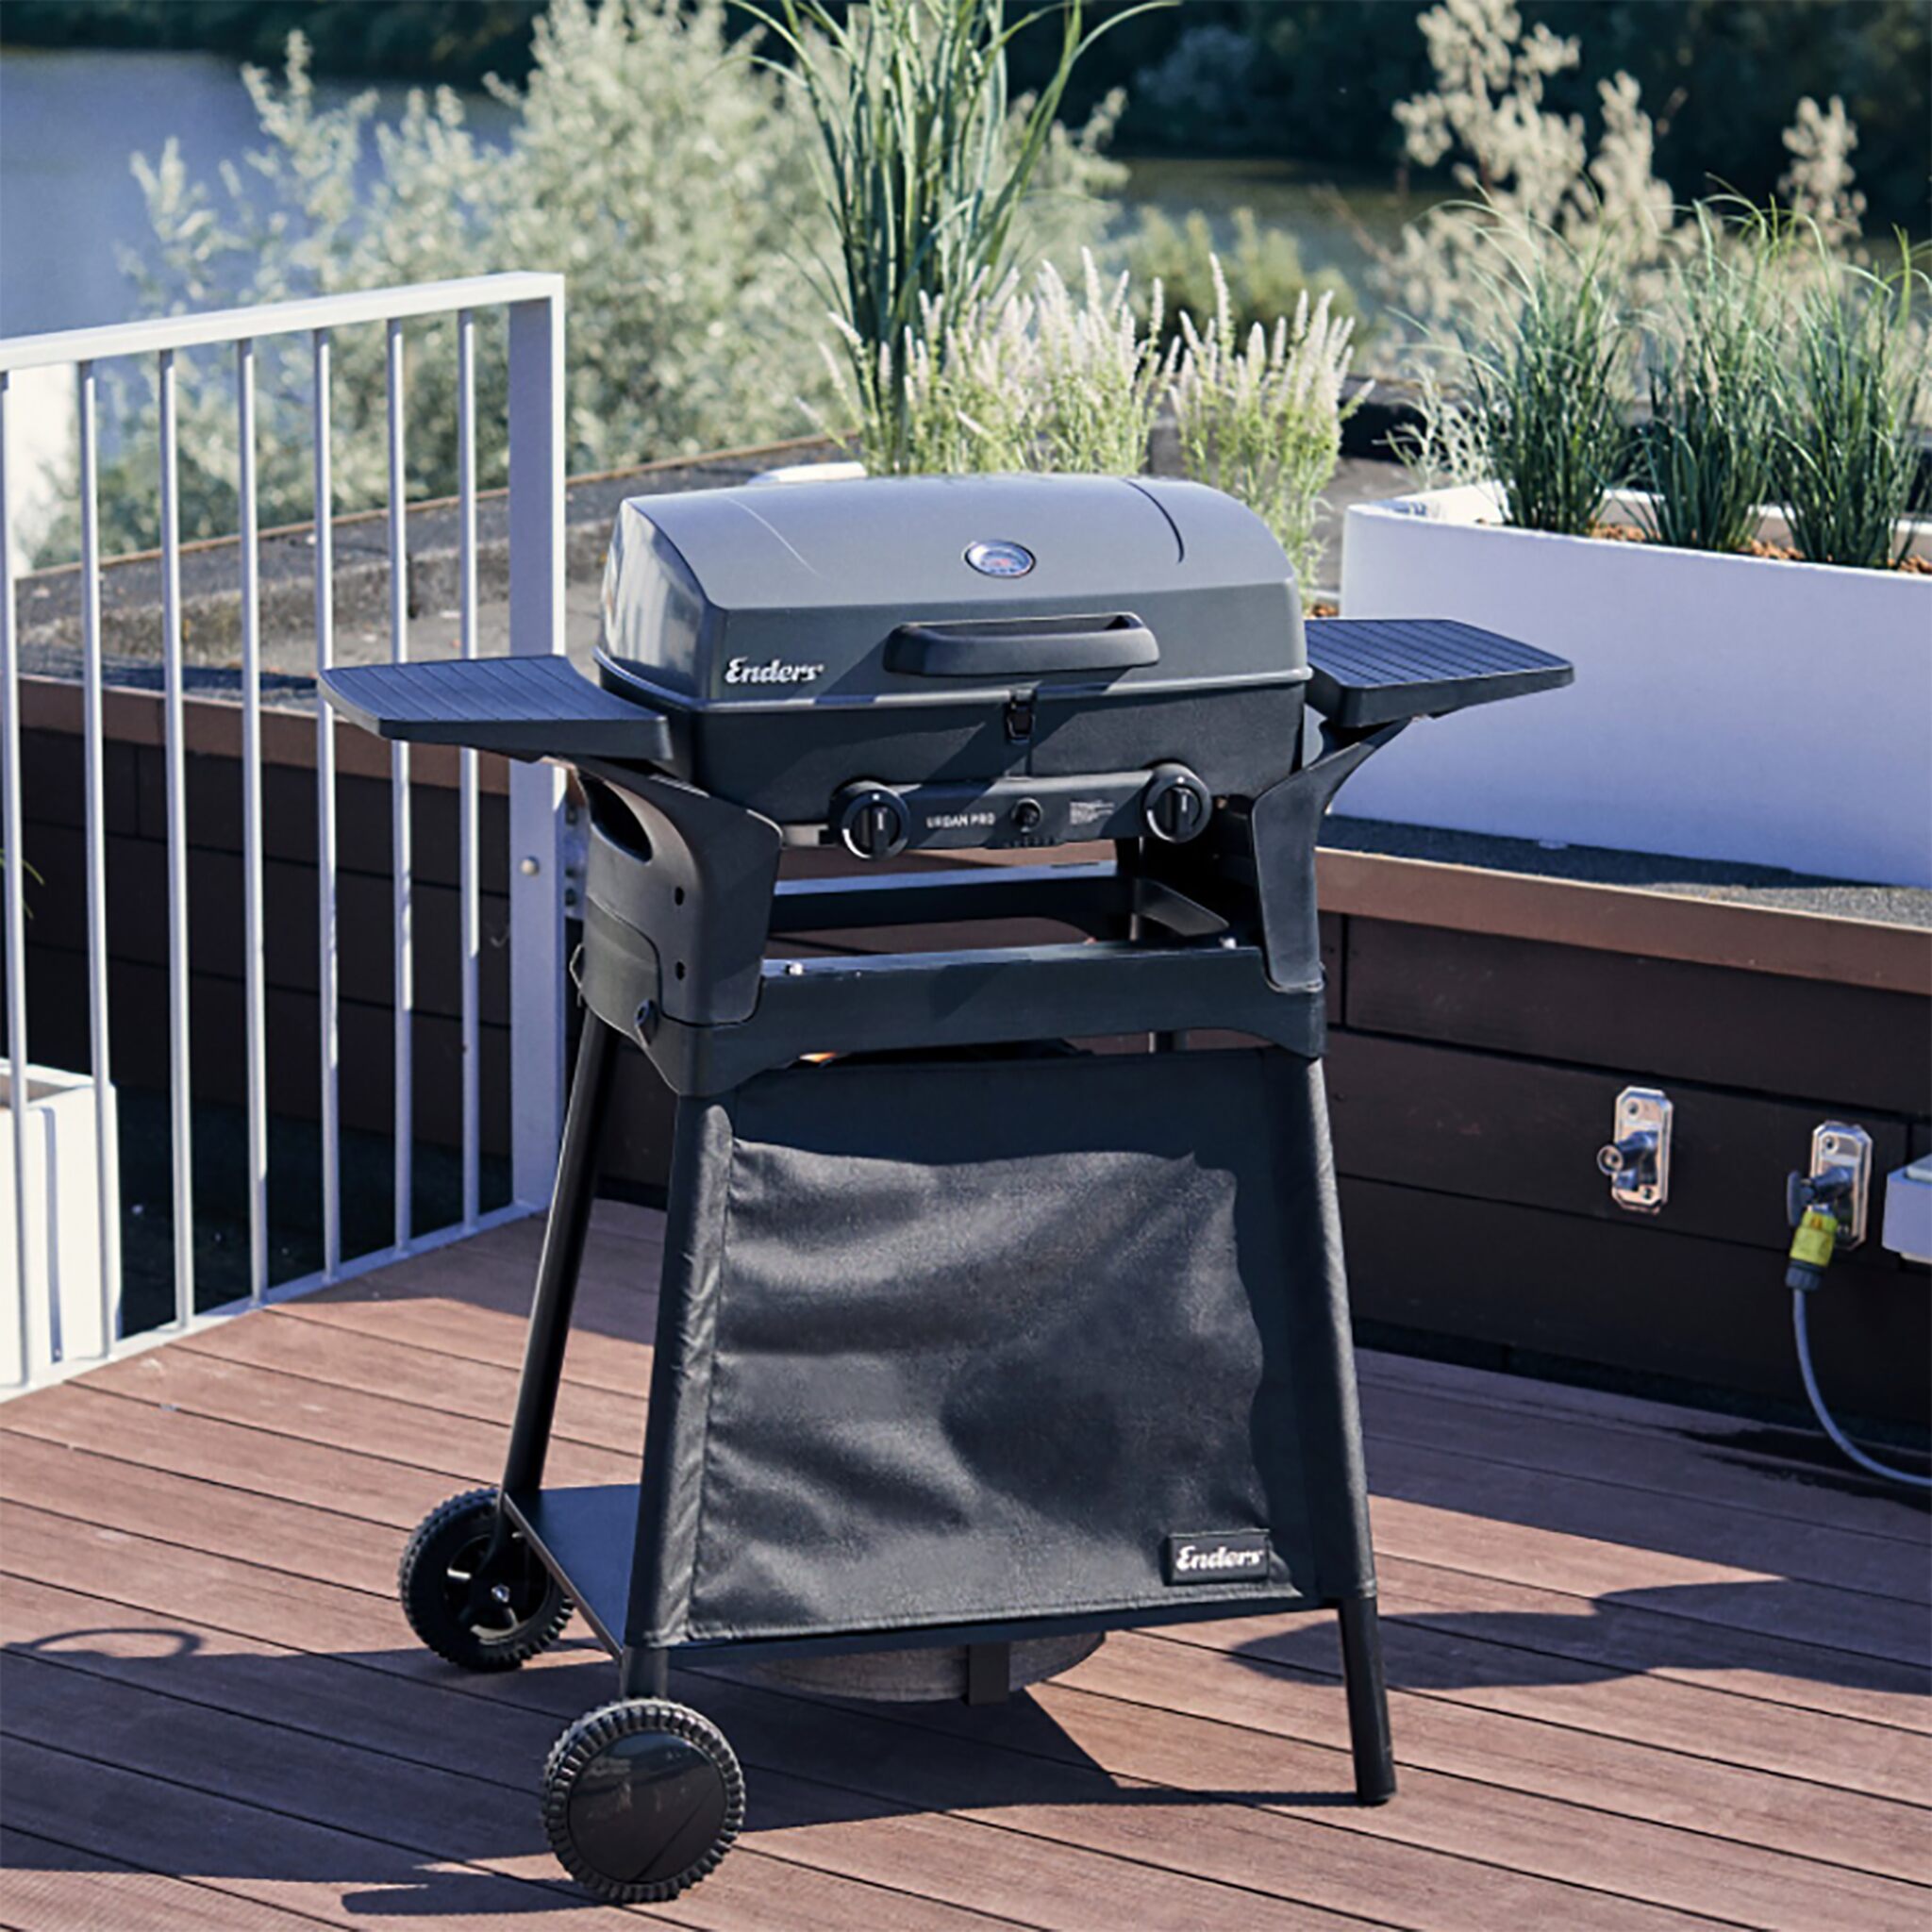 Enders Gas Grill URBAN PRO